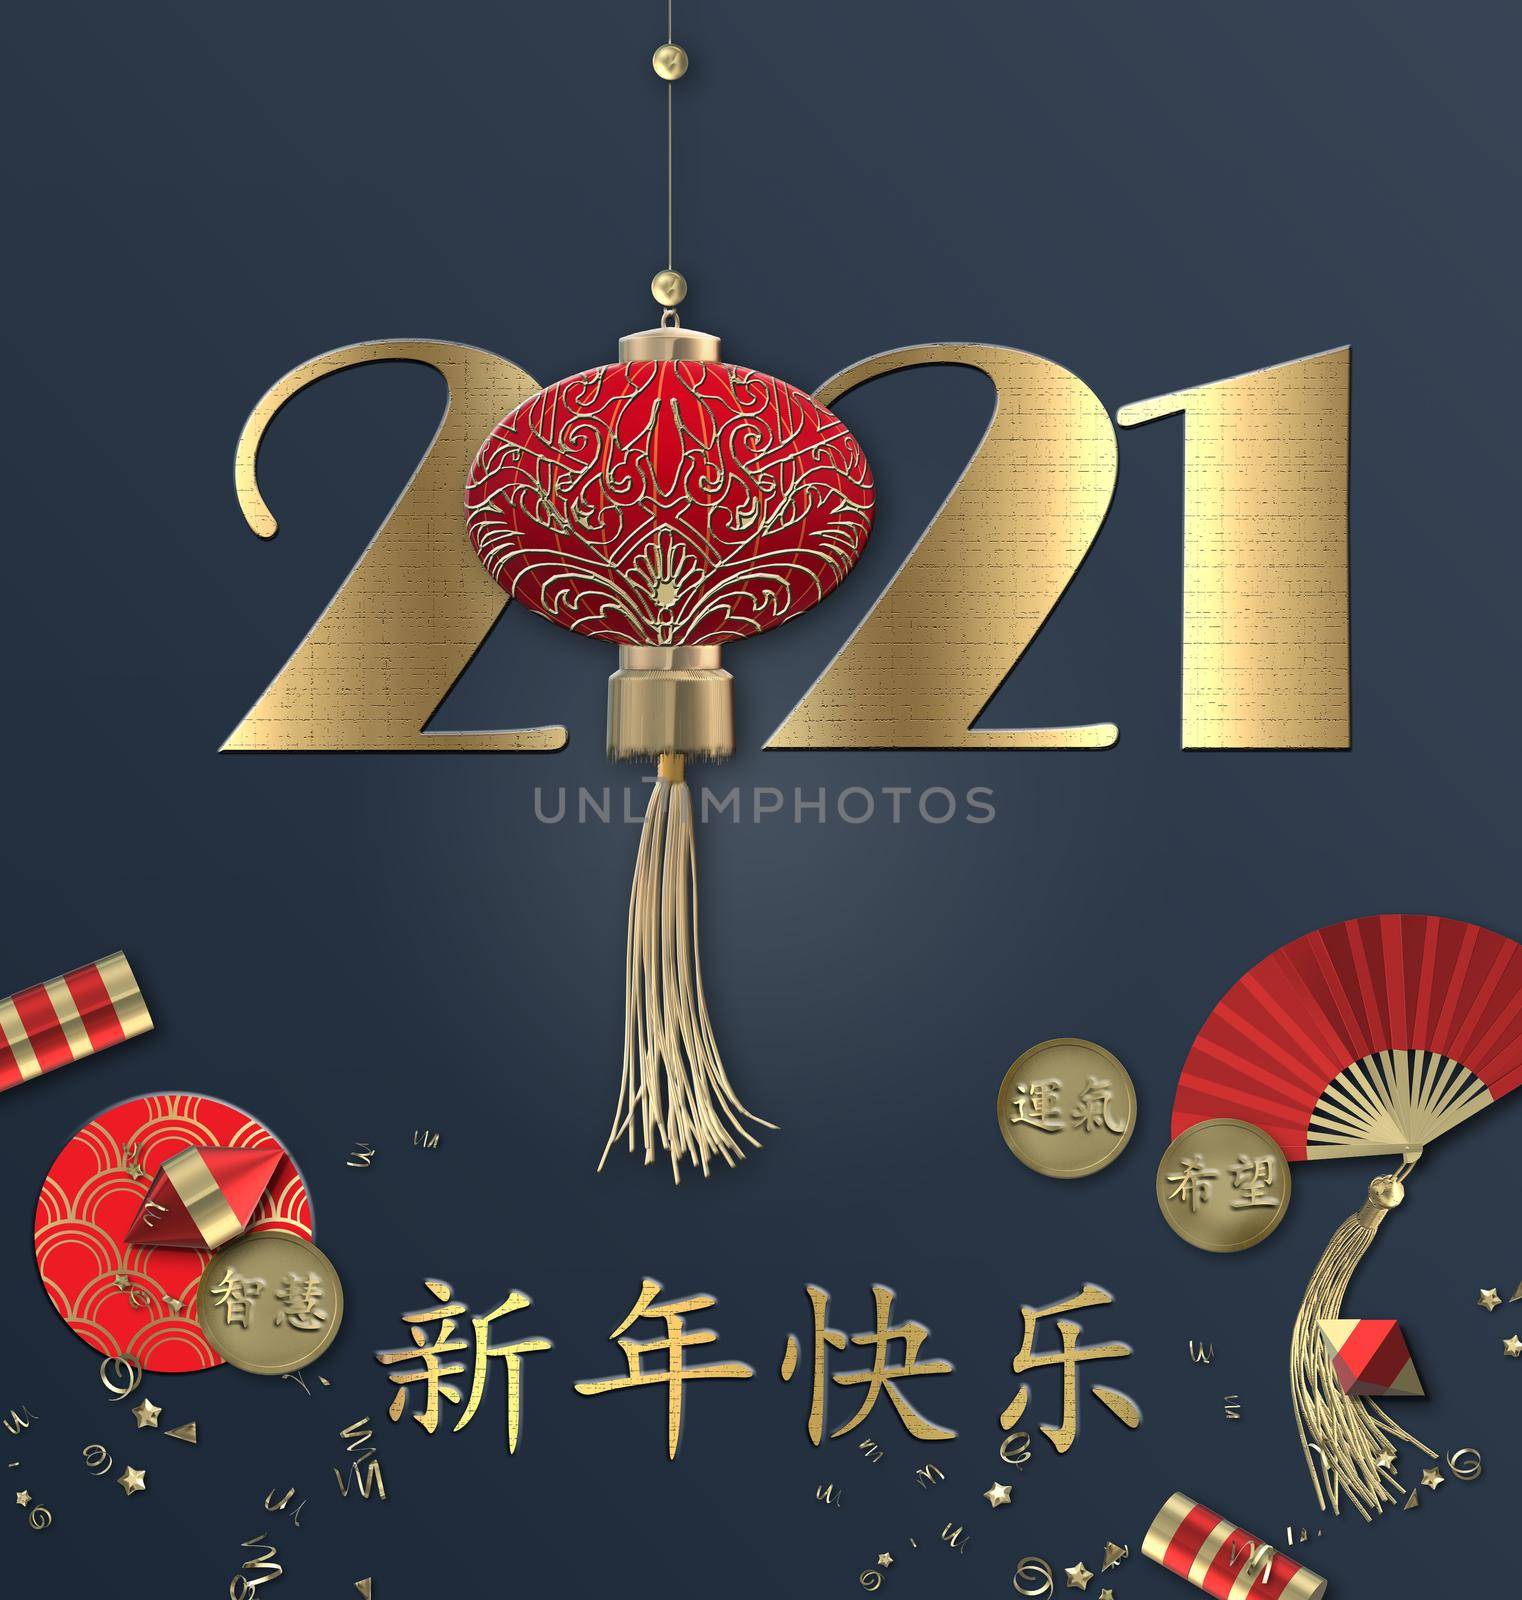 Chinese 2021 New Year on blue background. Gold text Happy Chinese new year, digit 2021, red fan, red gold lantern. Design for greetings, oriental new year card. 3D illustration